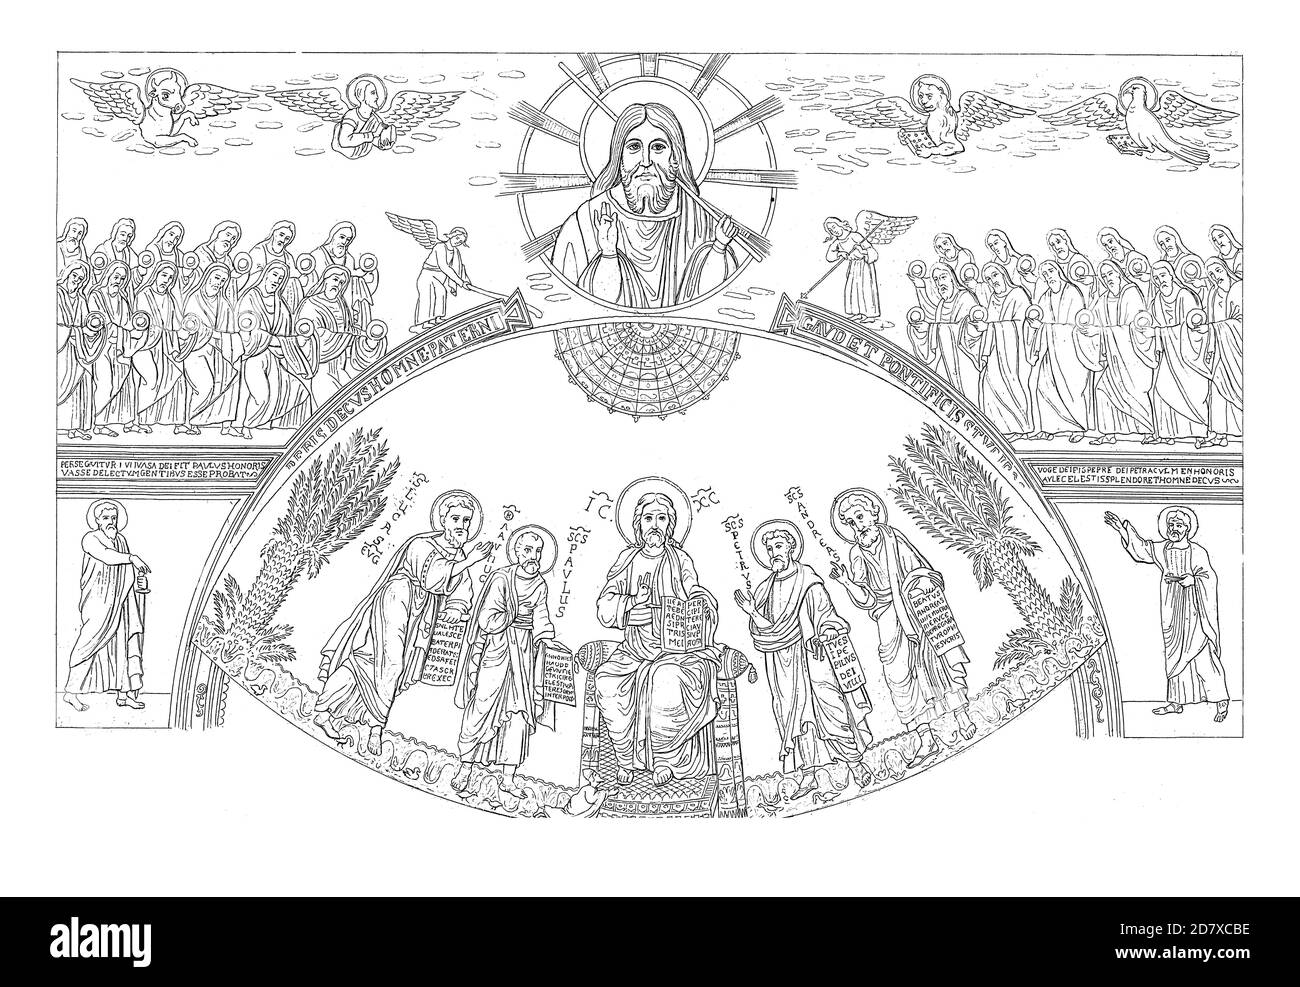 19th-century engraving depicting apse mosaic from the Basilica of Saint Paul in Rome, Italy. Illustration published in Systematischer Bilder Atlas - B Stock Photo